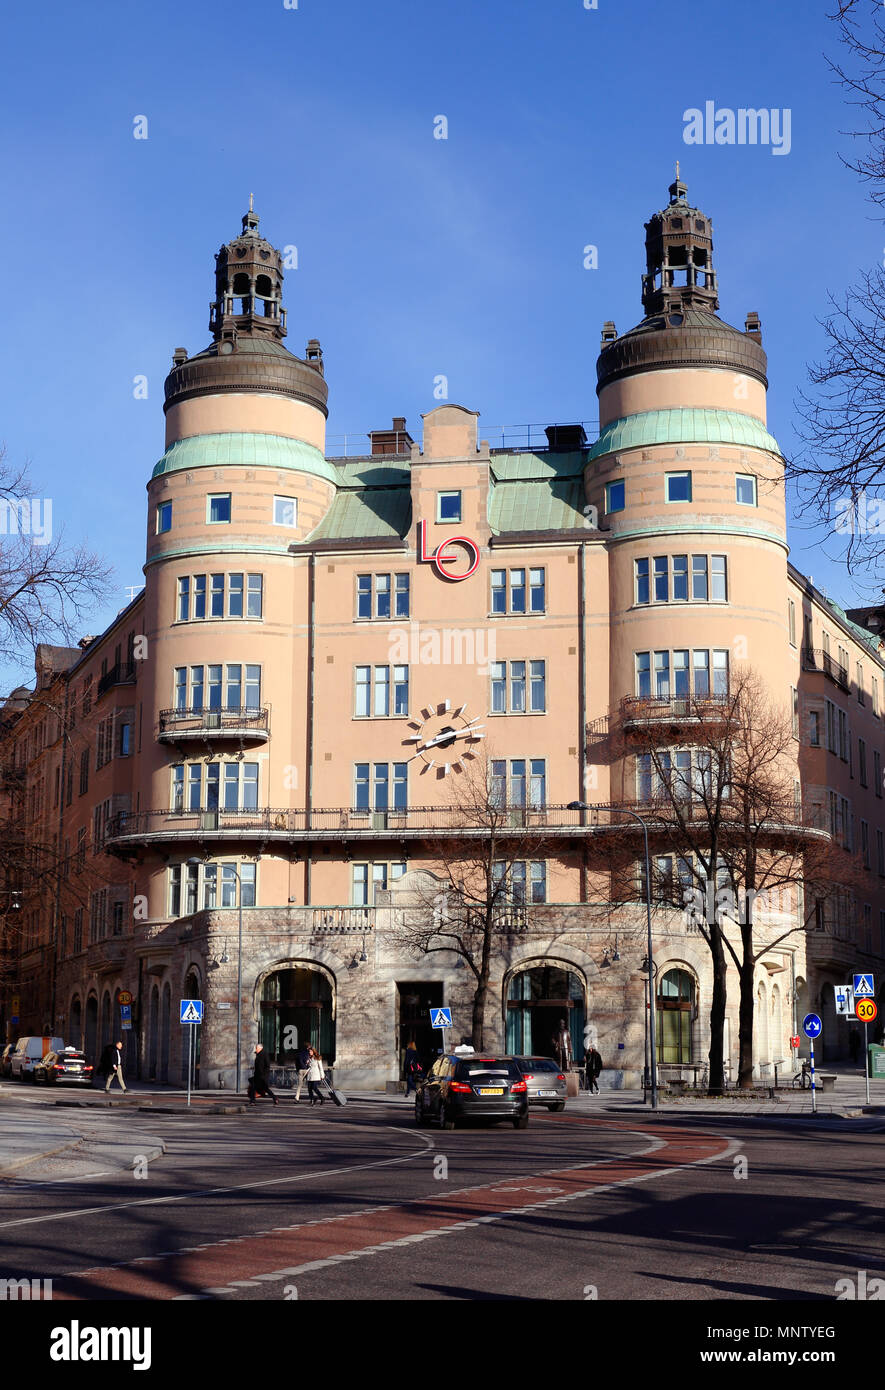 Stockholm, Sweden - April 11, 2018: Exterior of the building housing the Swedish Trade Union Confederation, LO, located at the Norra Bantorget square. Stock Photo